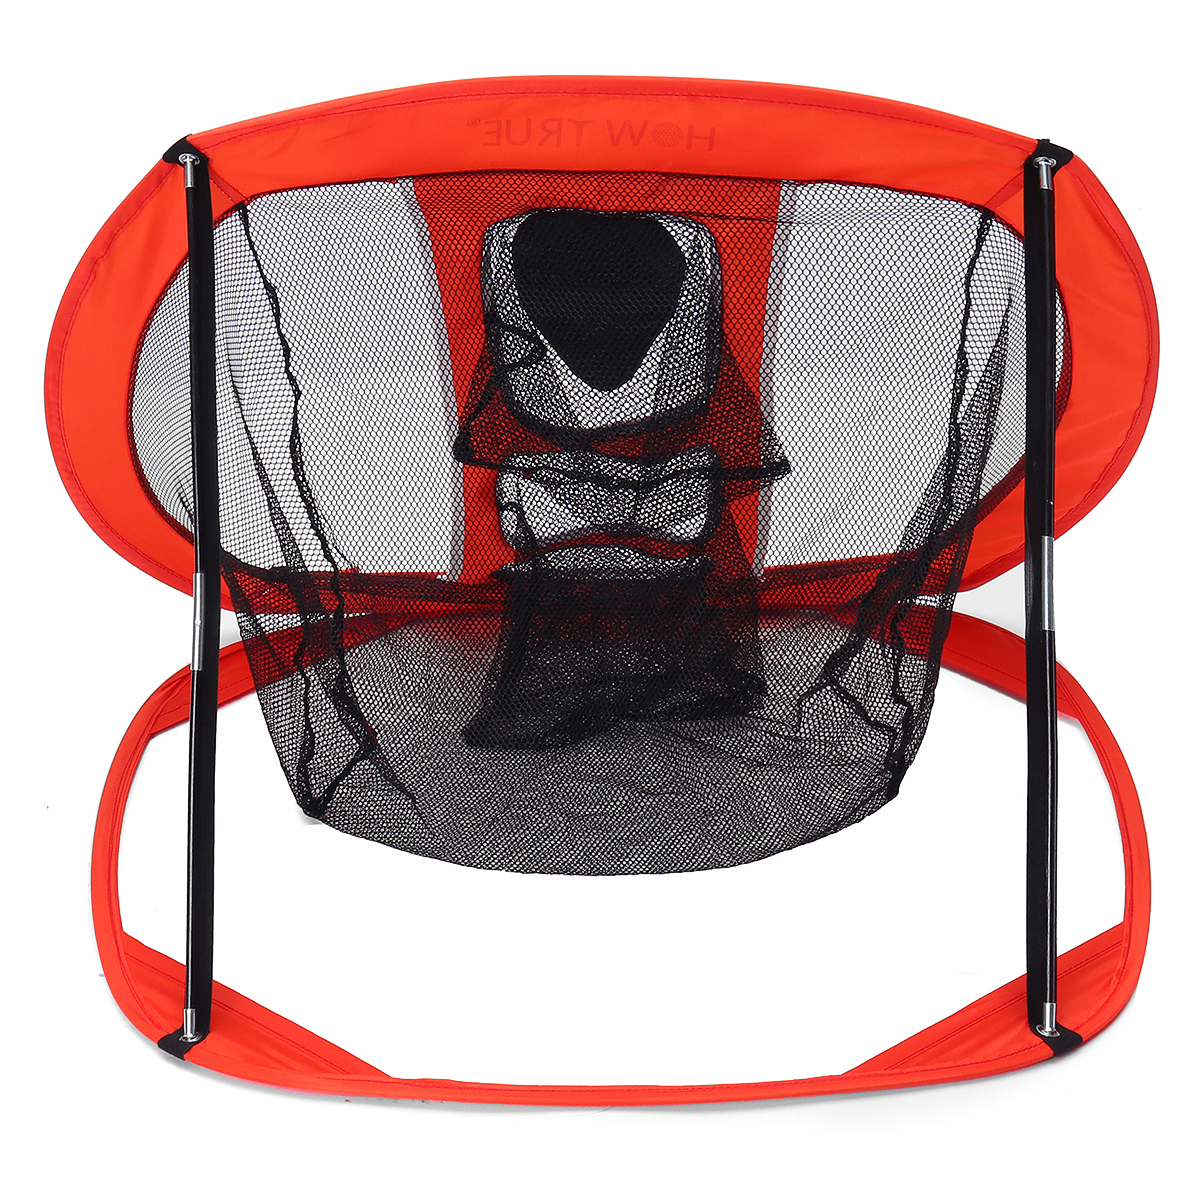 Foldable-Golf-Chipping-Net-Backyard-Driving-Aid-Indoor-Outdoor-Hitting-Practice-Garden-Living-Room-B-1688178-6